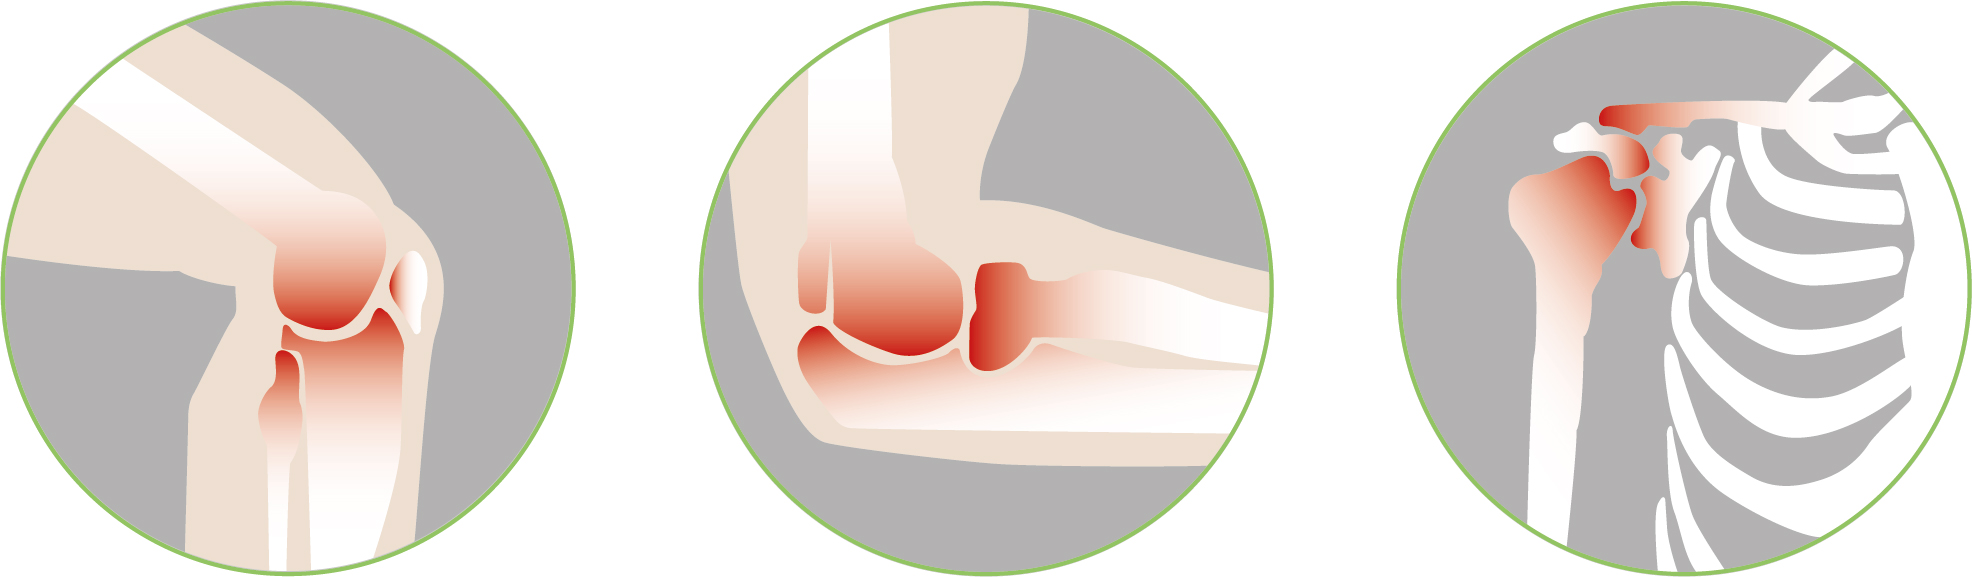 Image of commonly affected joints under conditions such as Osteoarthritis